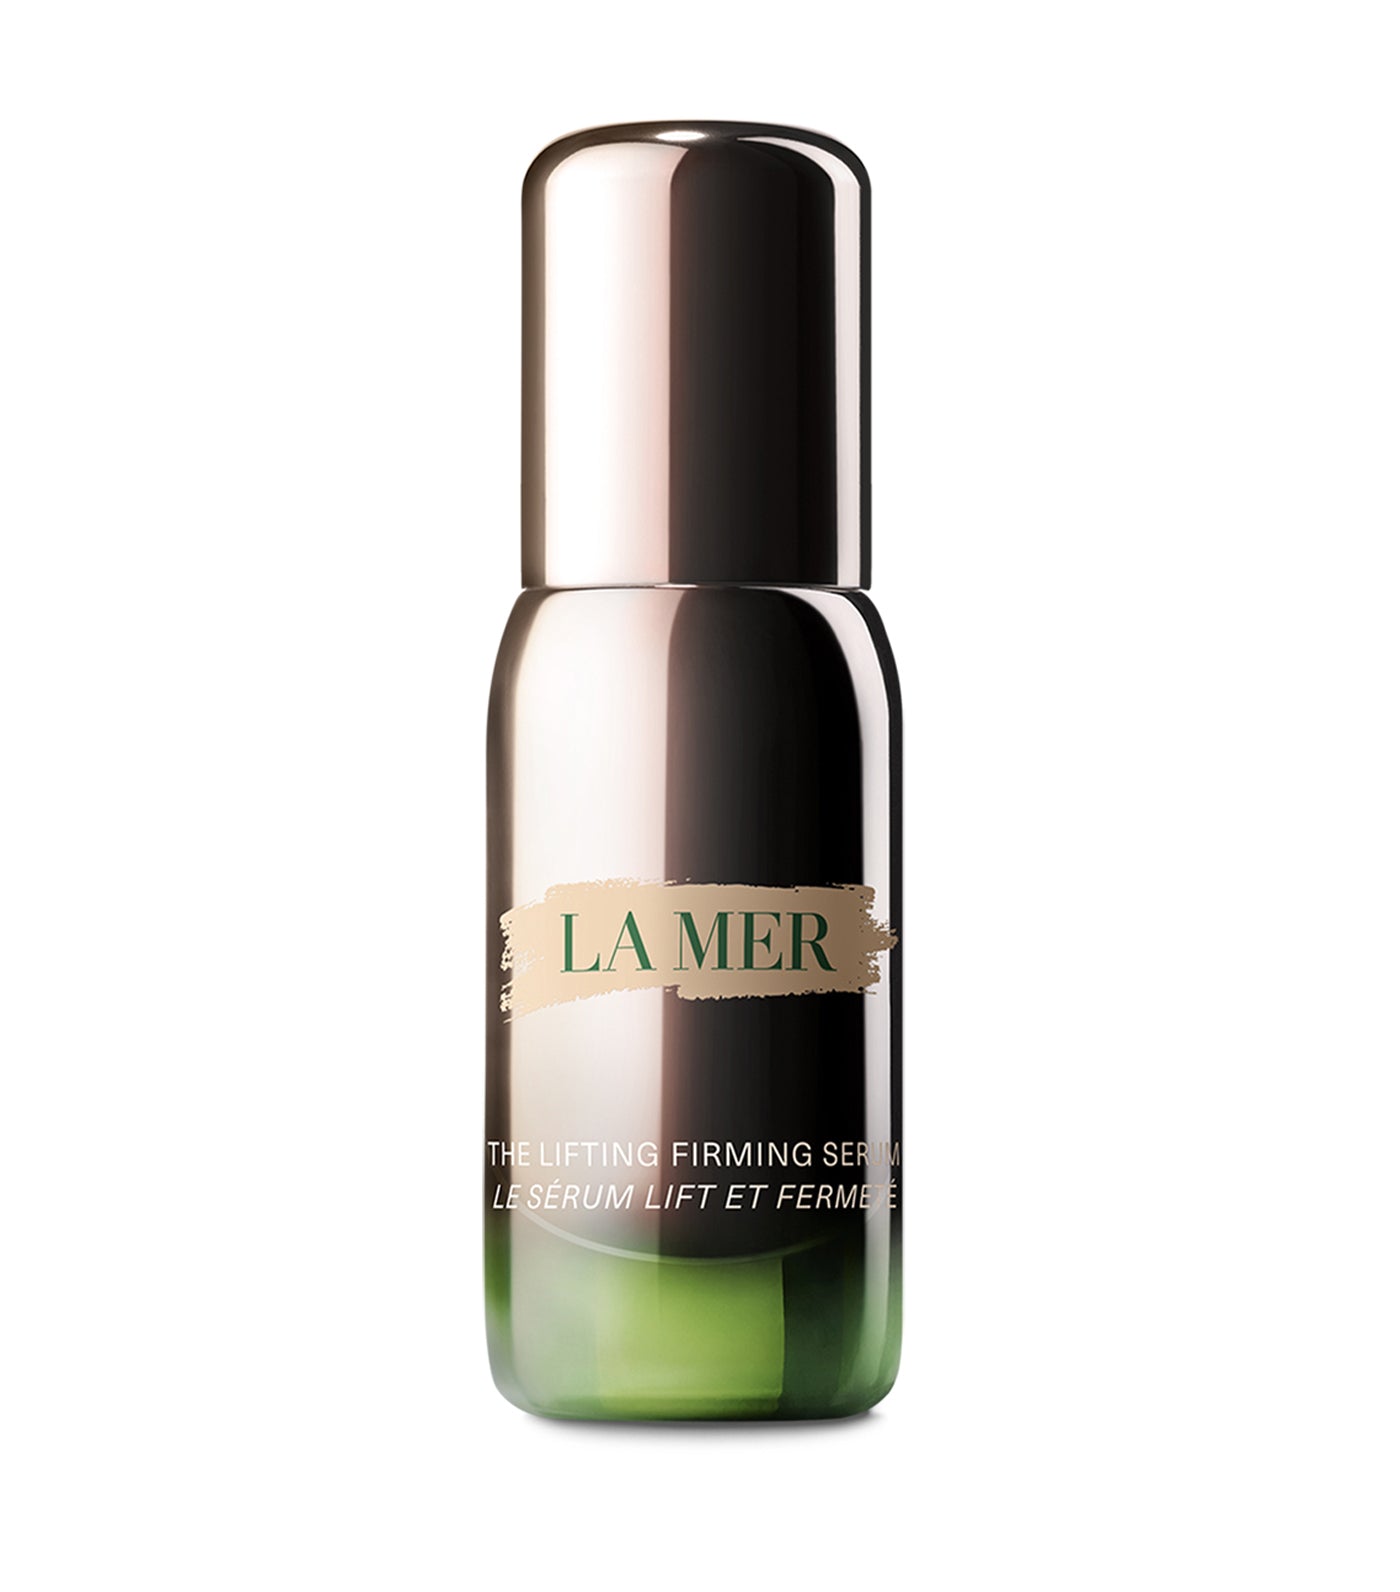 NEW The Lifting Firming Serum